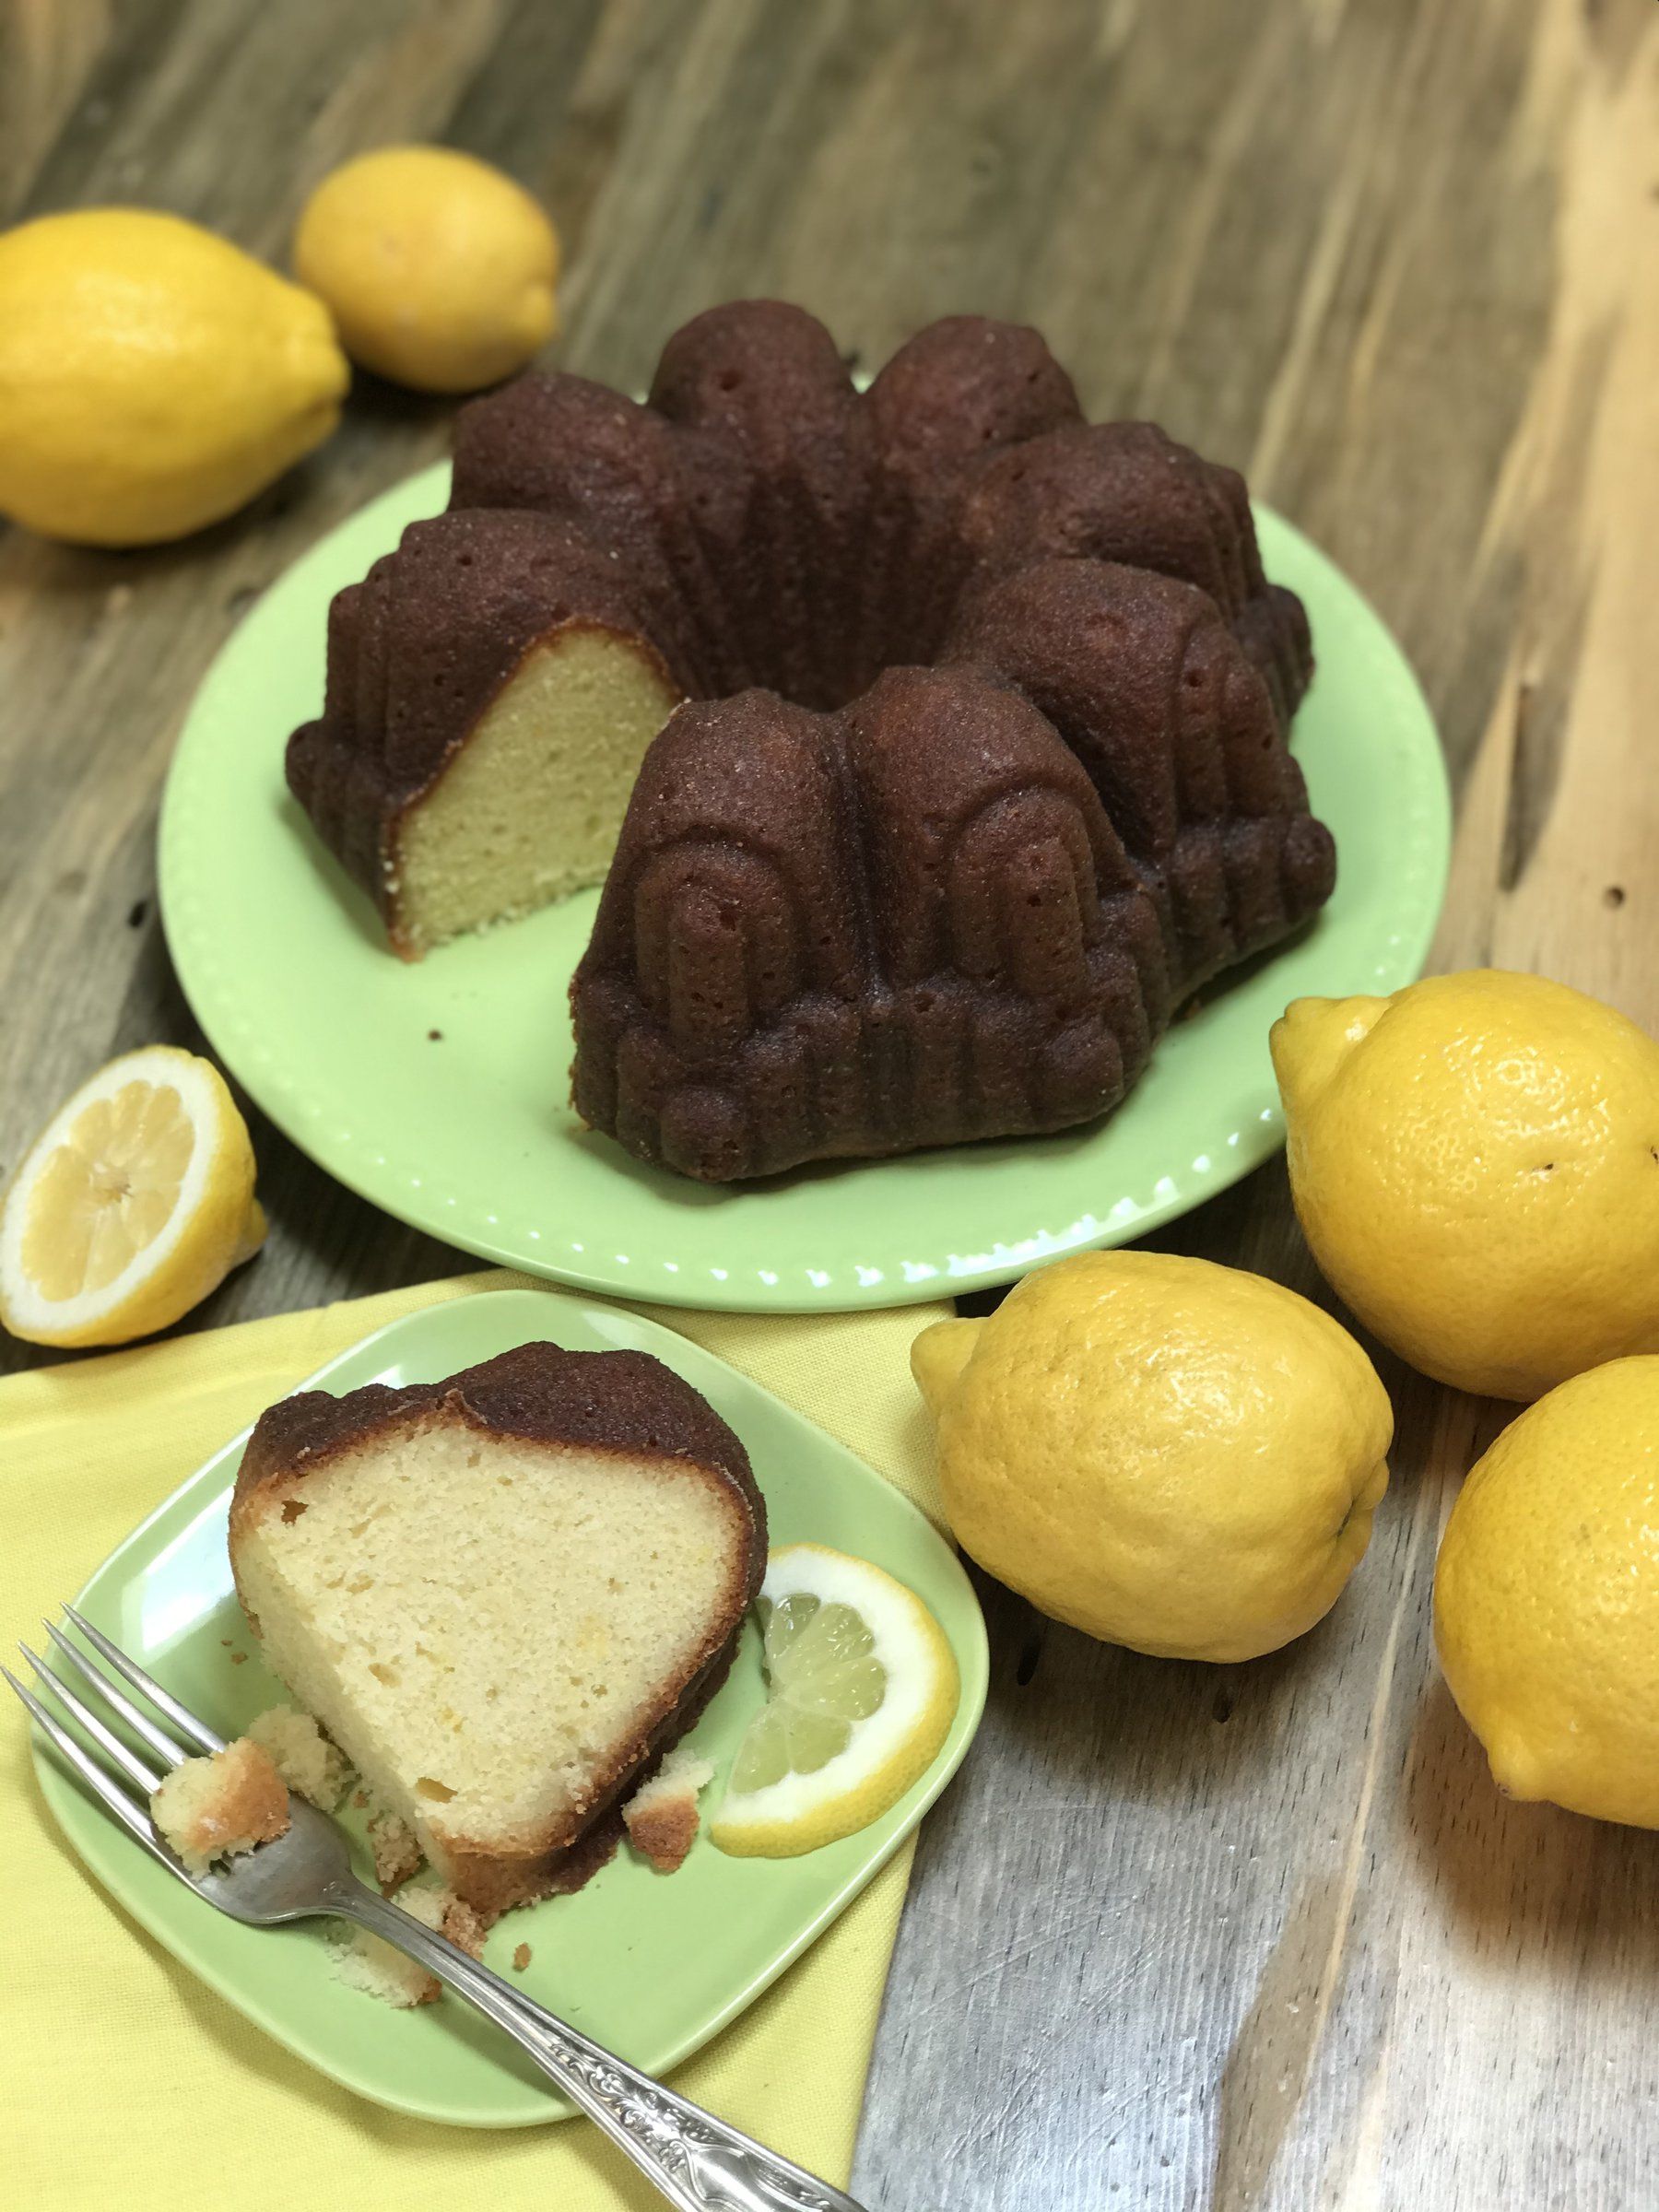 Like this 50-year-old lemon cake recipe from Maida Heatter, cookbook  classics are ripe for discovery | The Seattle Times